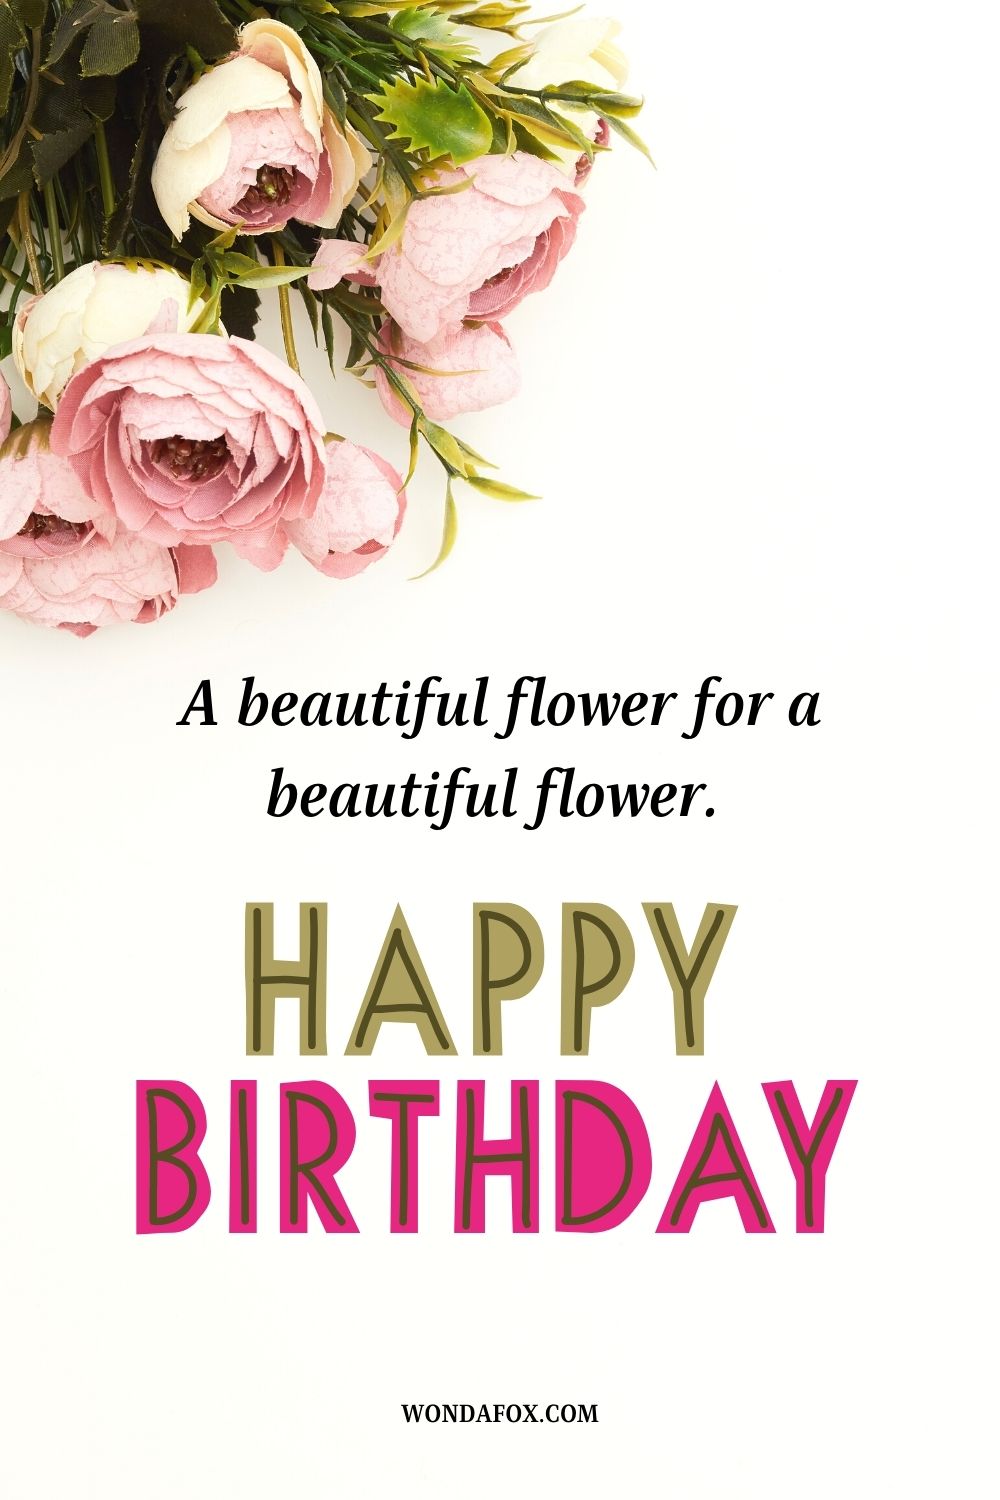 A beautiful flower for a beautiful flower. Happy birthday!